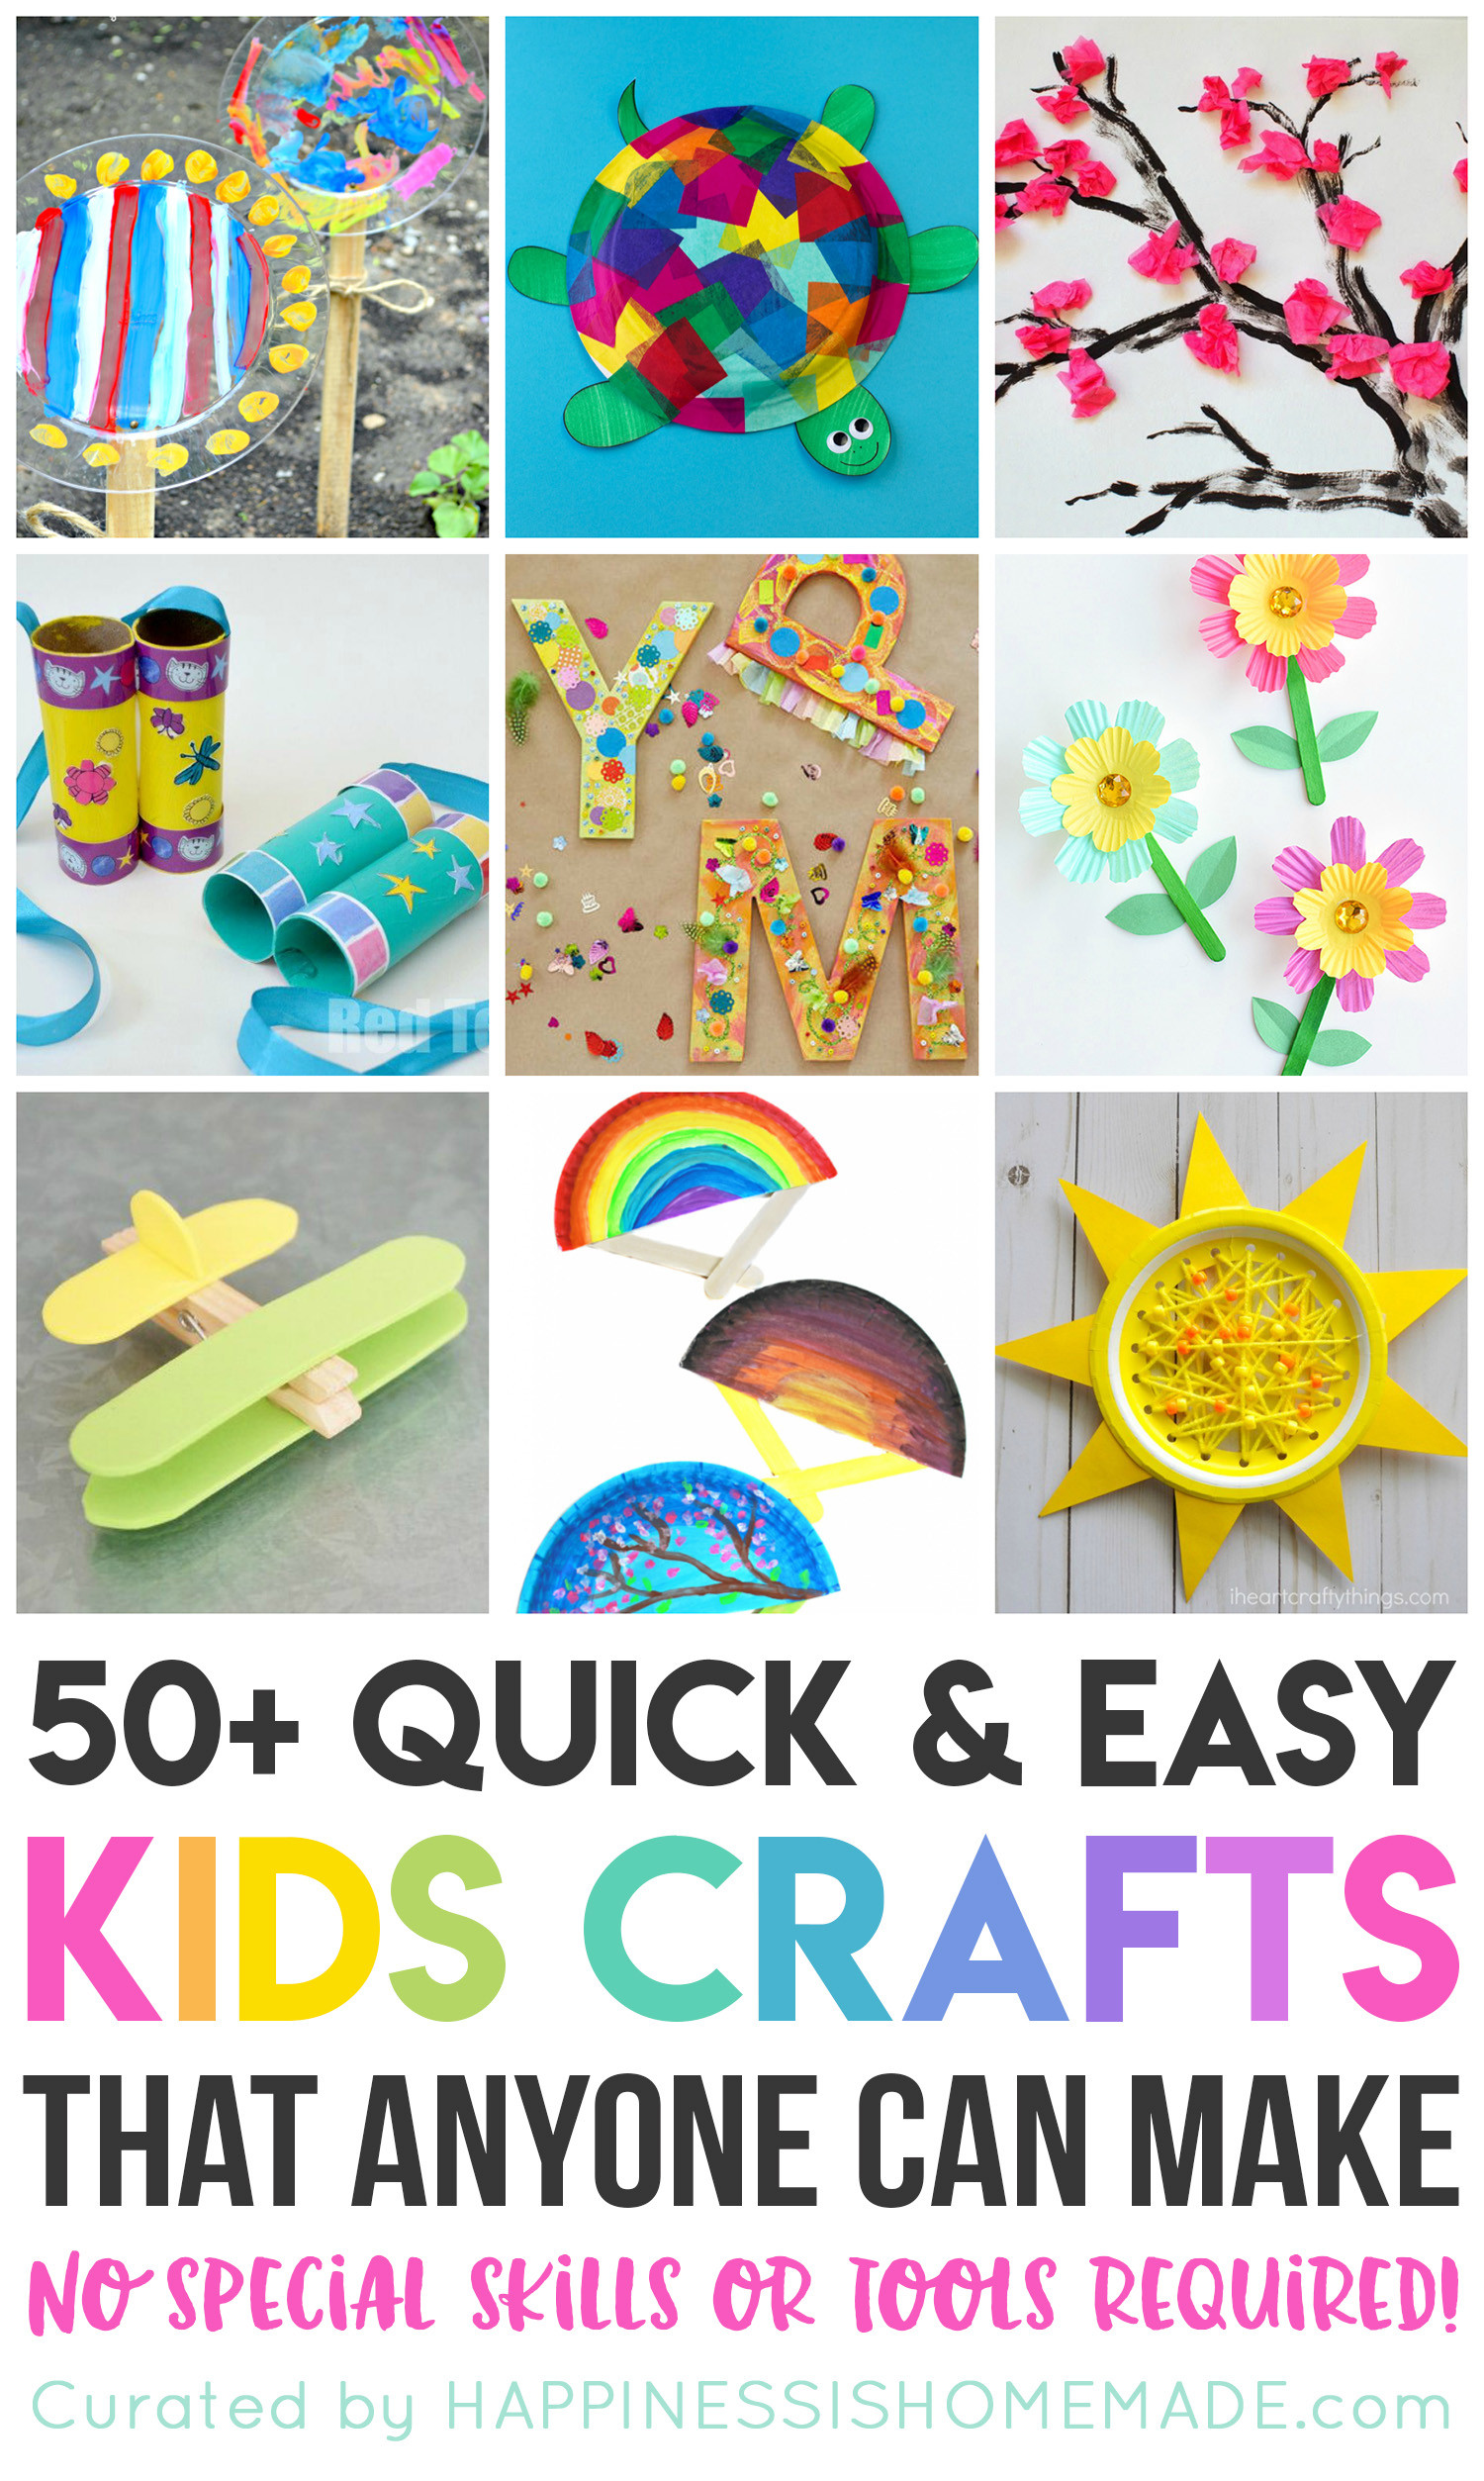 Easy Kids Projects
 50 Quick & Easy Kids Crafts that ANYONE Can Make